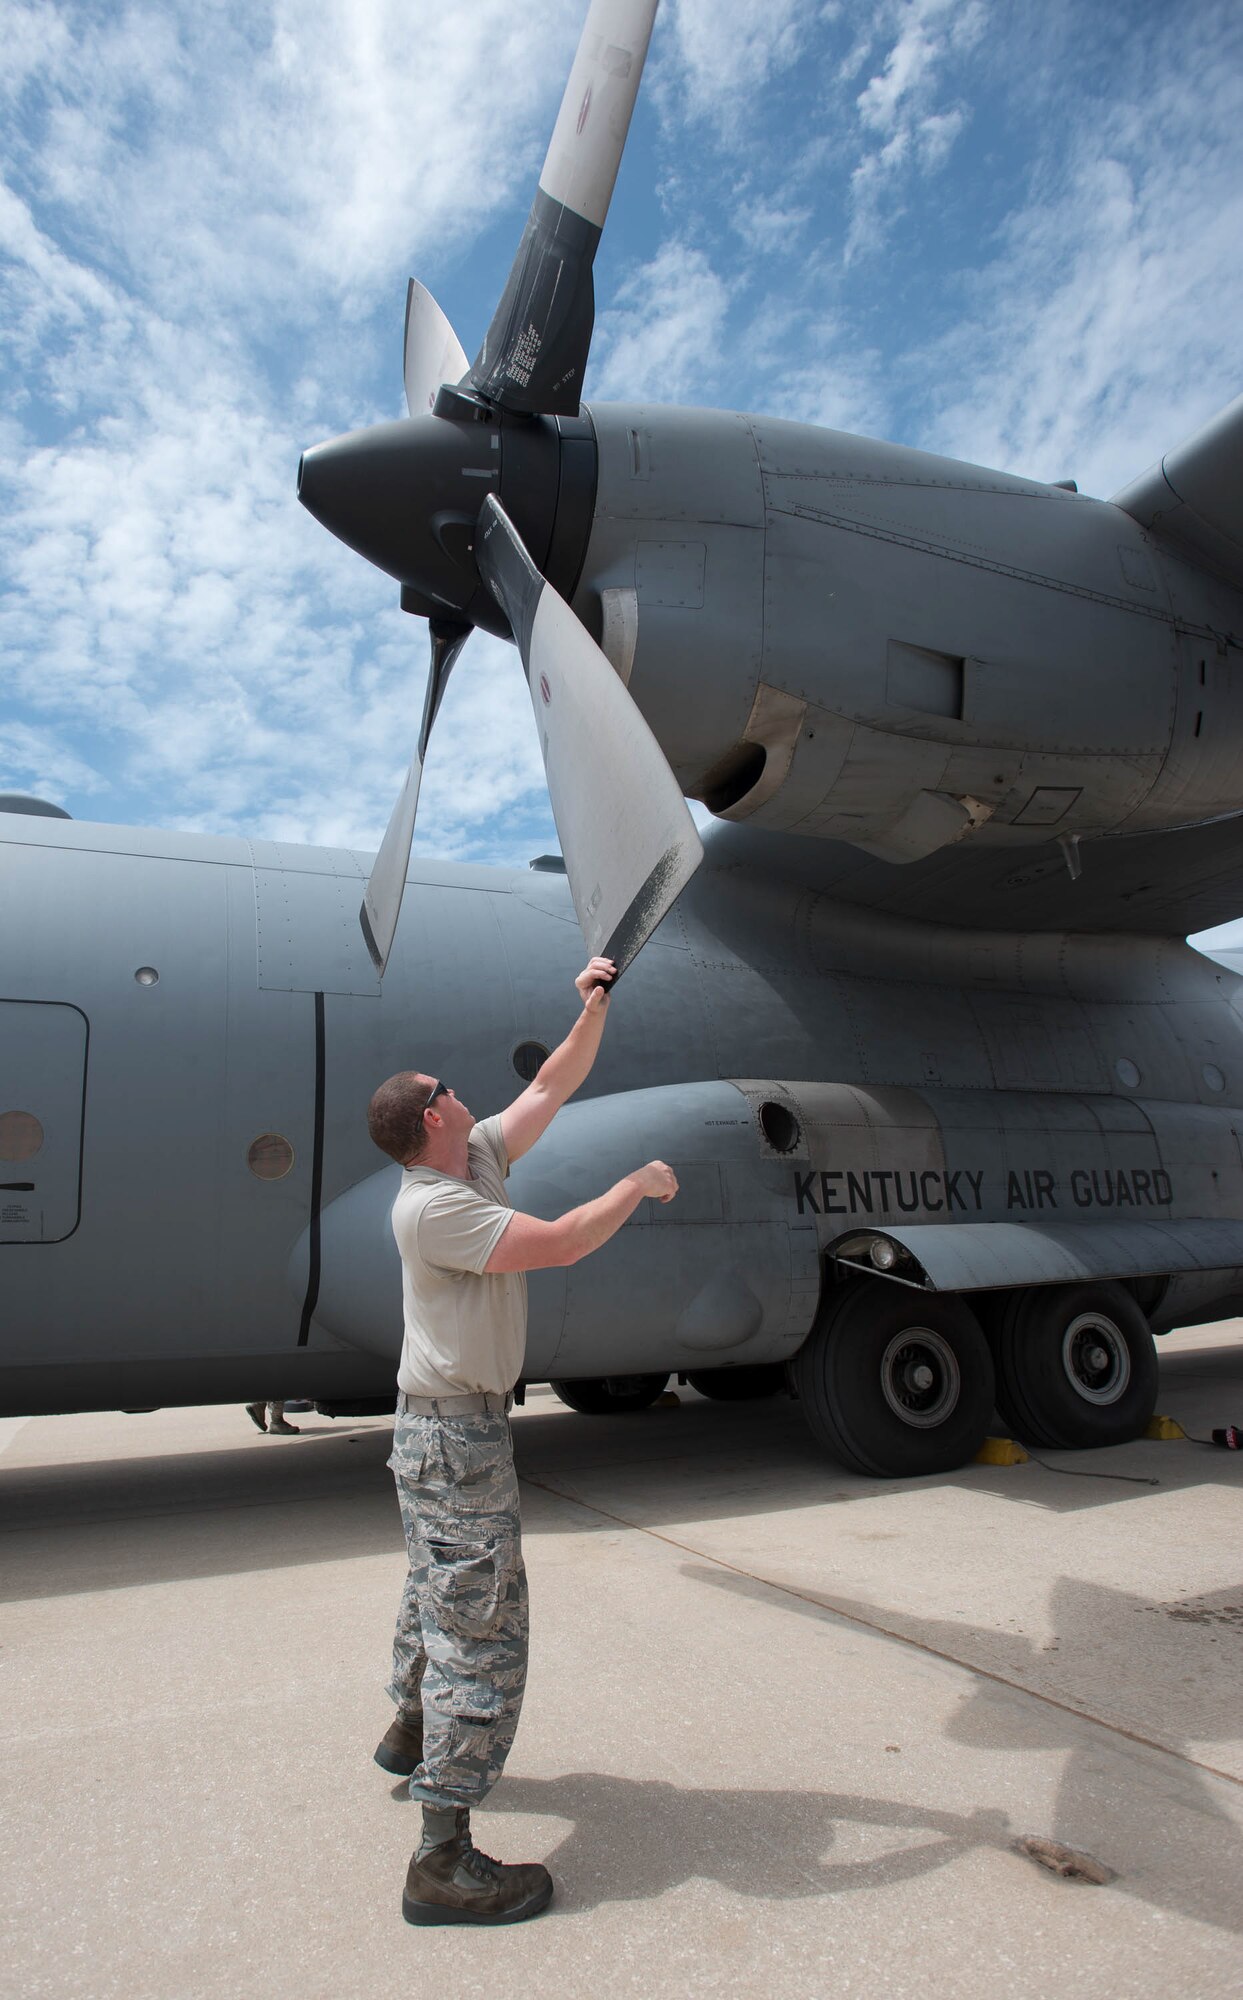 Staff Sgt. Jeremy Kelly, an engine mechanic with the Kentucky Air National Guard’s 123rd Maintenance Squadron, spins a prop blade on a C-130 Hercules after a flight at Naval Station Rota, Spain, on April 26, 2017, in support of Exercise African Lion. Multiple units from the U.S. Marine Corps, U.S. Army, U.S. Navy, U.S. Air Force and the Kentucky and Utah Air National Guards conducted multilateral and stability operations training with units from the Royal Moroccan Armed Forces in the Kingdom of Morocco during the exercise, which ran from April 19 to 28. The annual combined multilateral exercise is designed to improve interoperability and mutual understanding of each nation’s tactics, techniques and procedures while demonstrating the strong bond between the nations’ militaries. (U.S. Air Force photo by Master Sgt. Phil Speck)